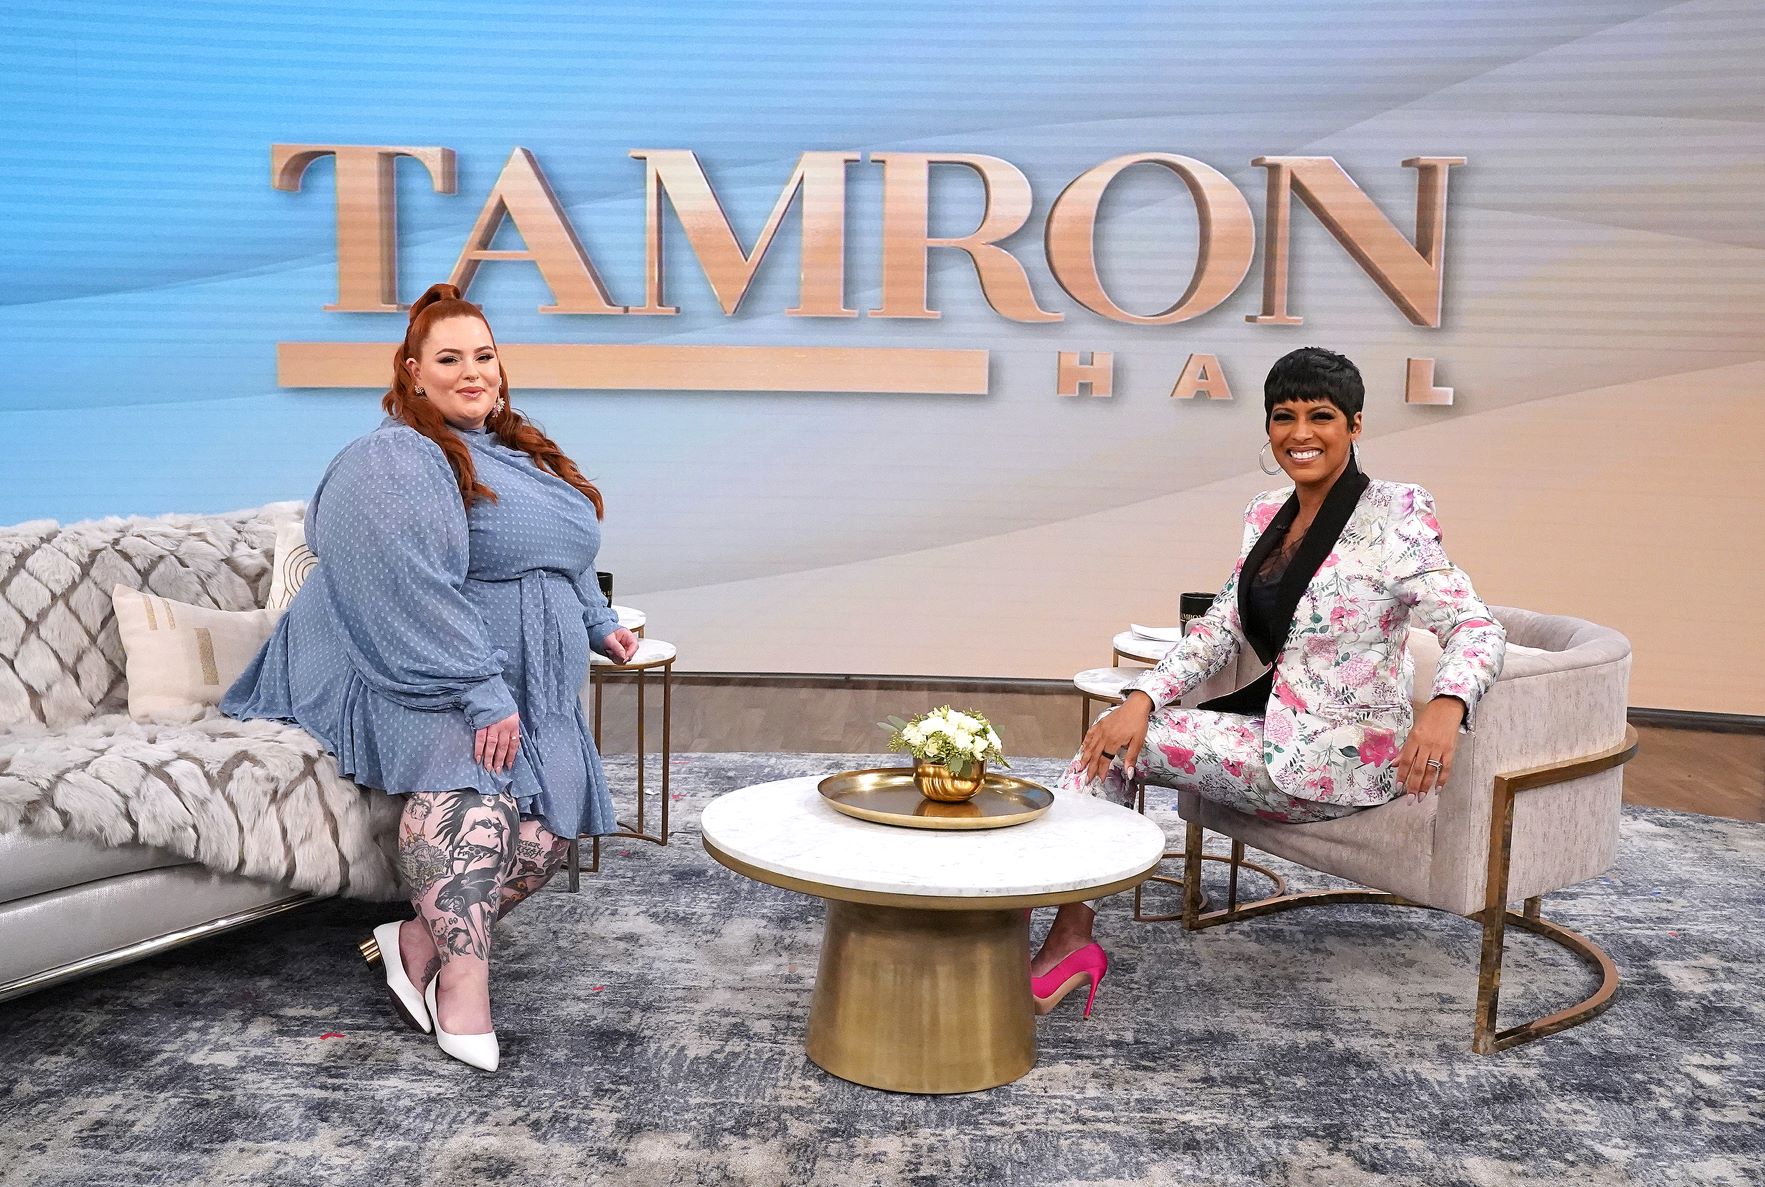 Plus Size Model Tess Holiday Discusses Eating Disorder On ‘Tamron Hall Show’